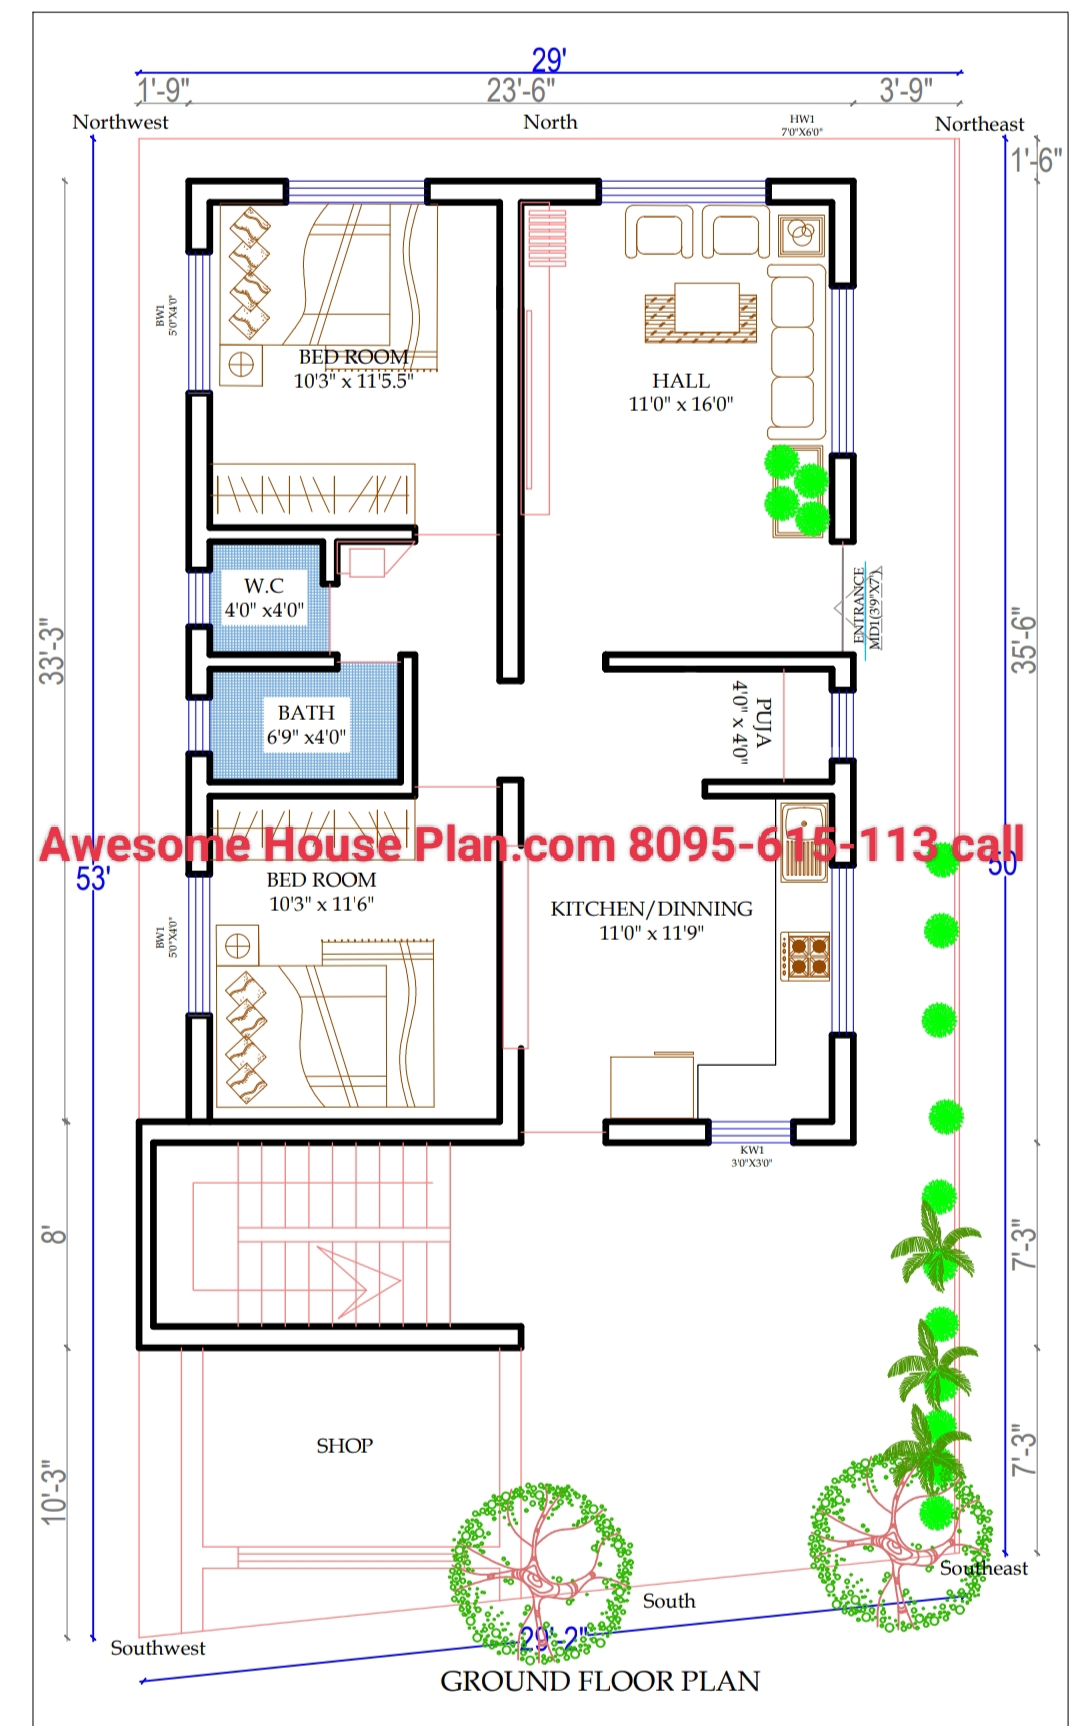 30 x 40 south face 2 bedroom house plan